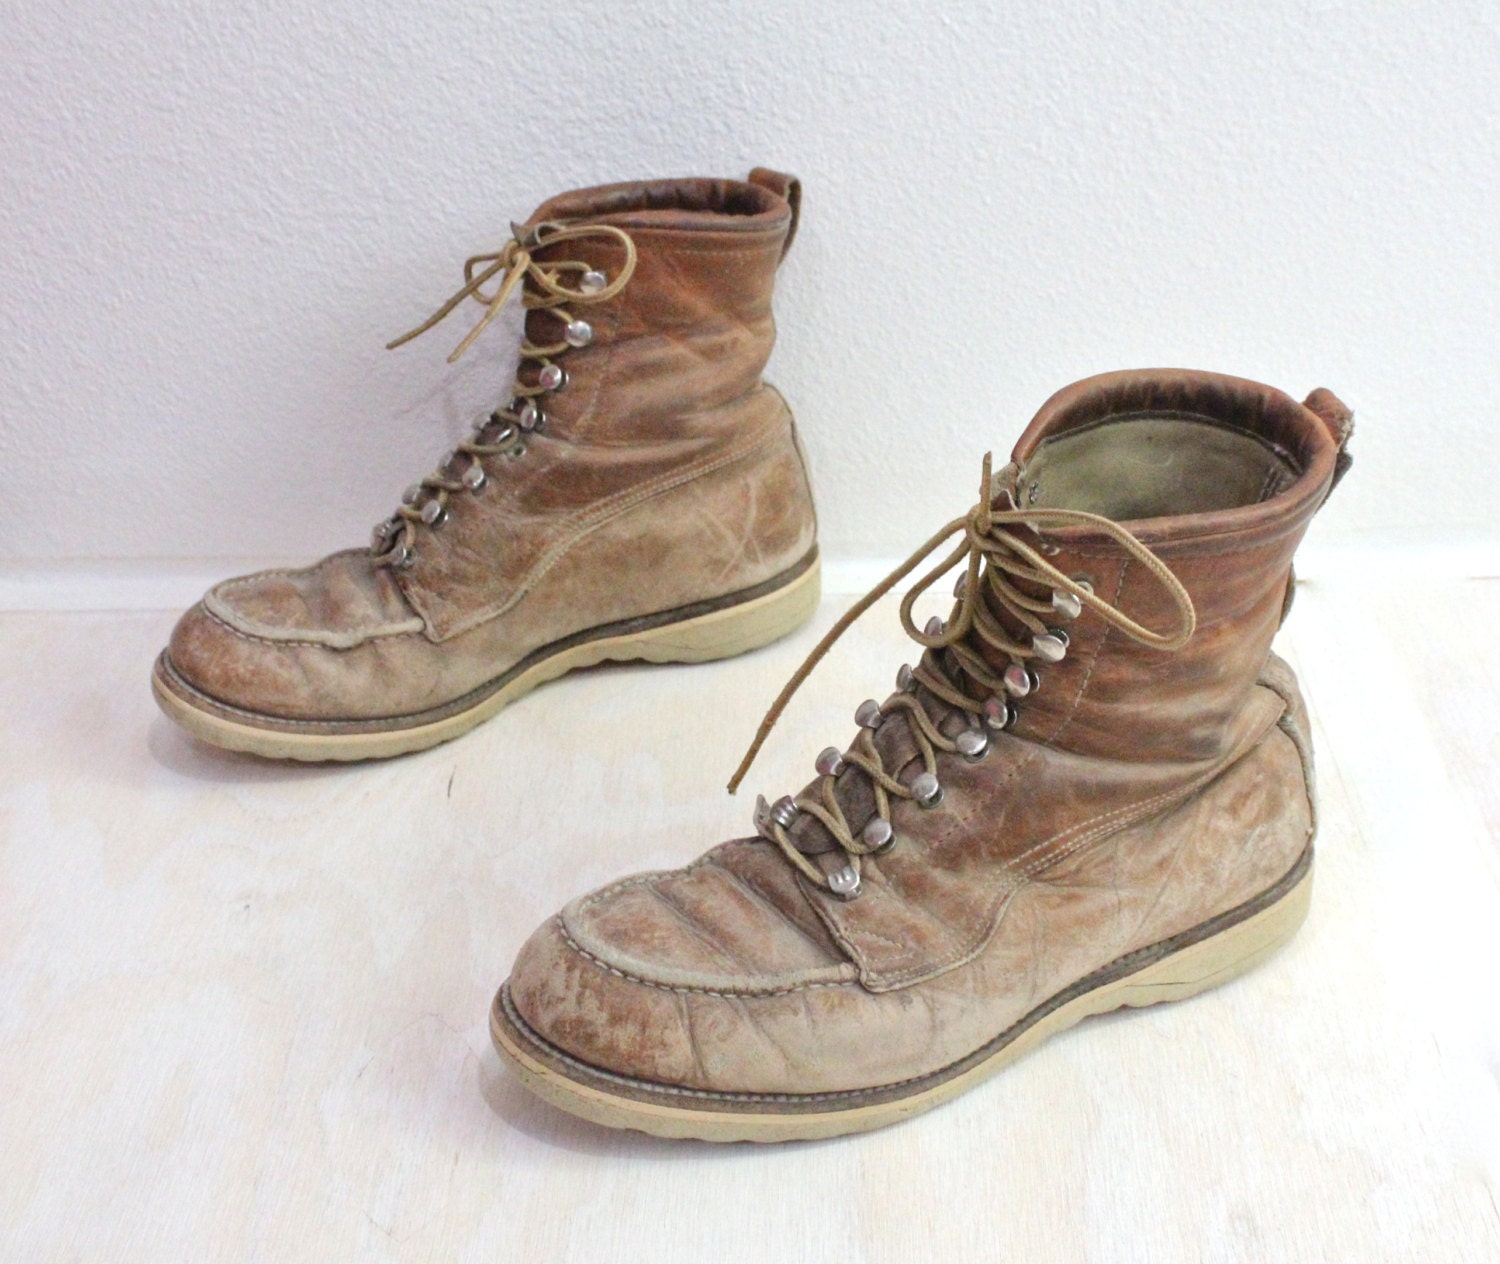 Vintage Mens Rustic Leather Work Boots by claudedonohoshop on Etsy